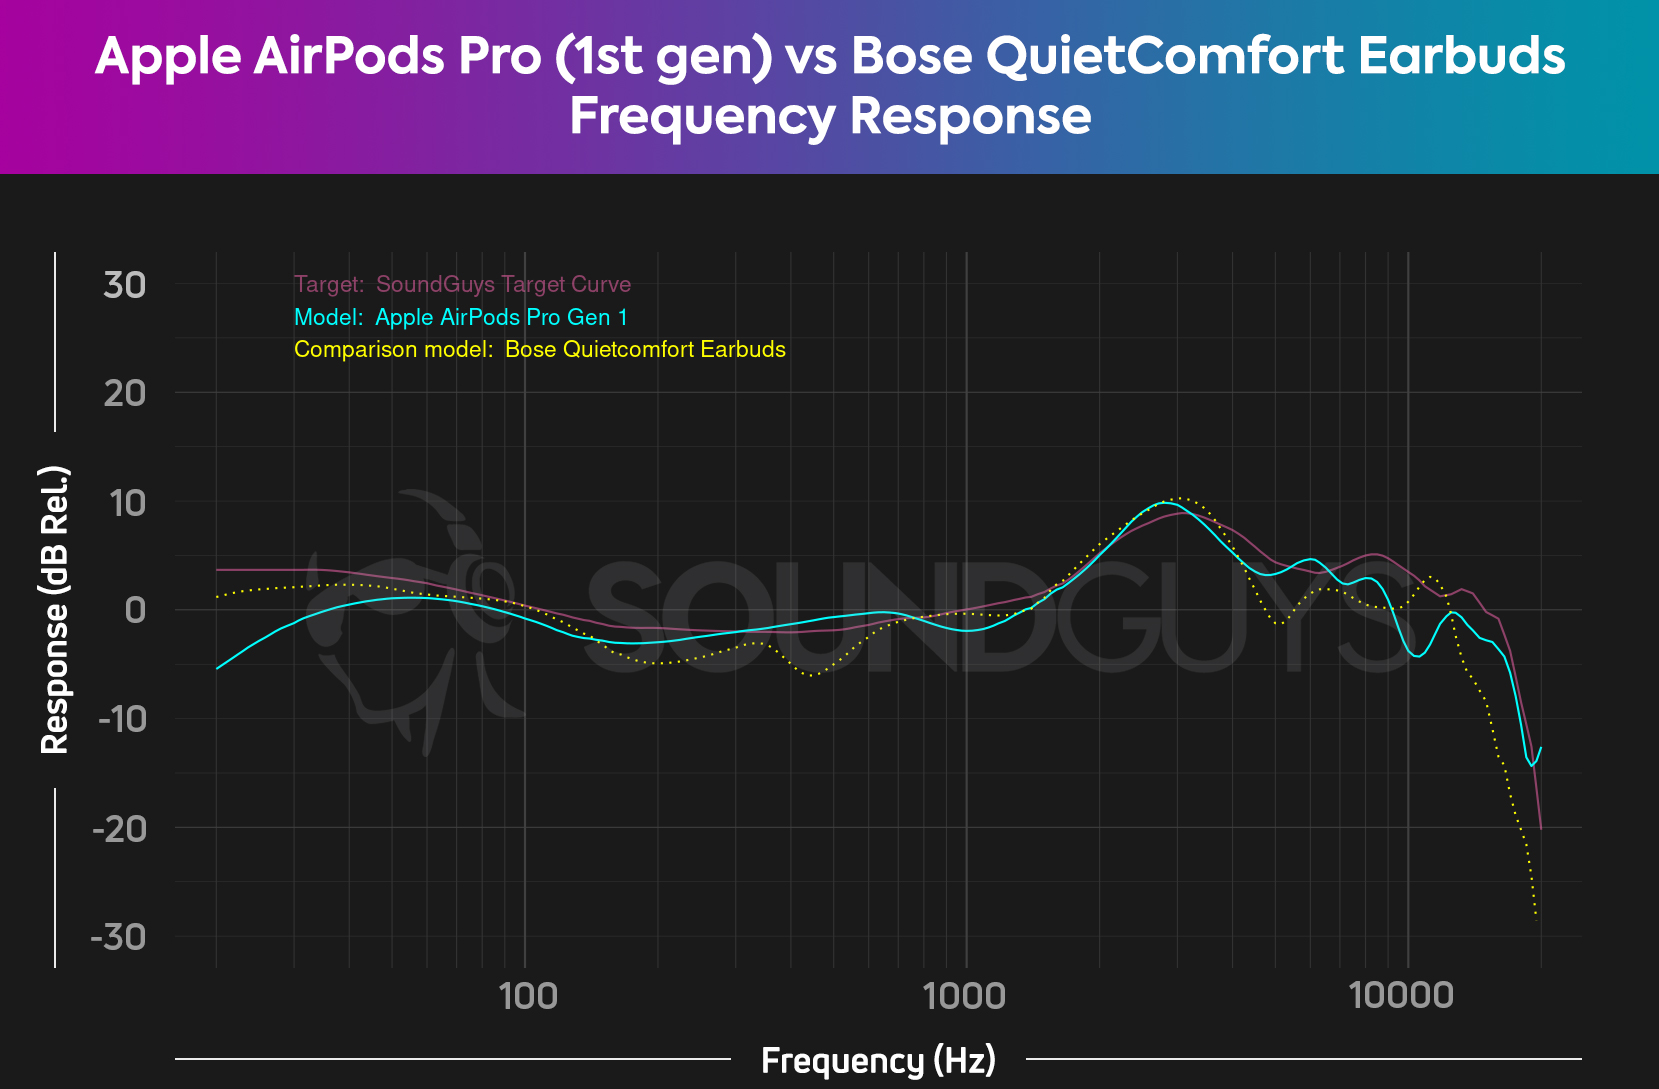 A chart compares the Apple AirPods Pro and Bose QC Earbuds' frequency response.